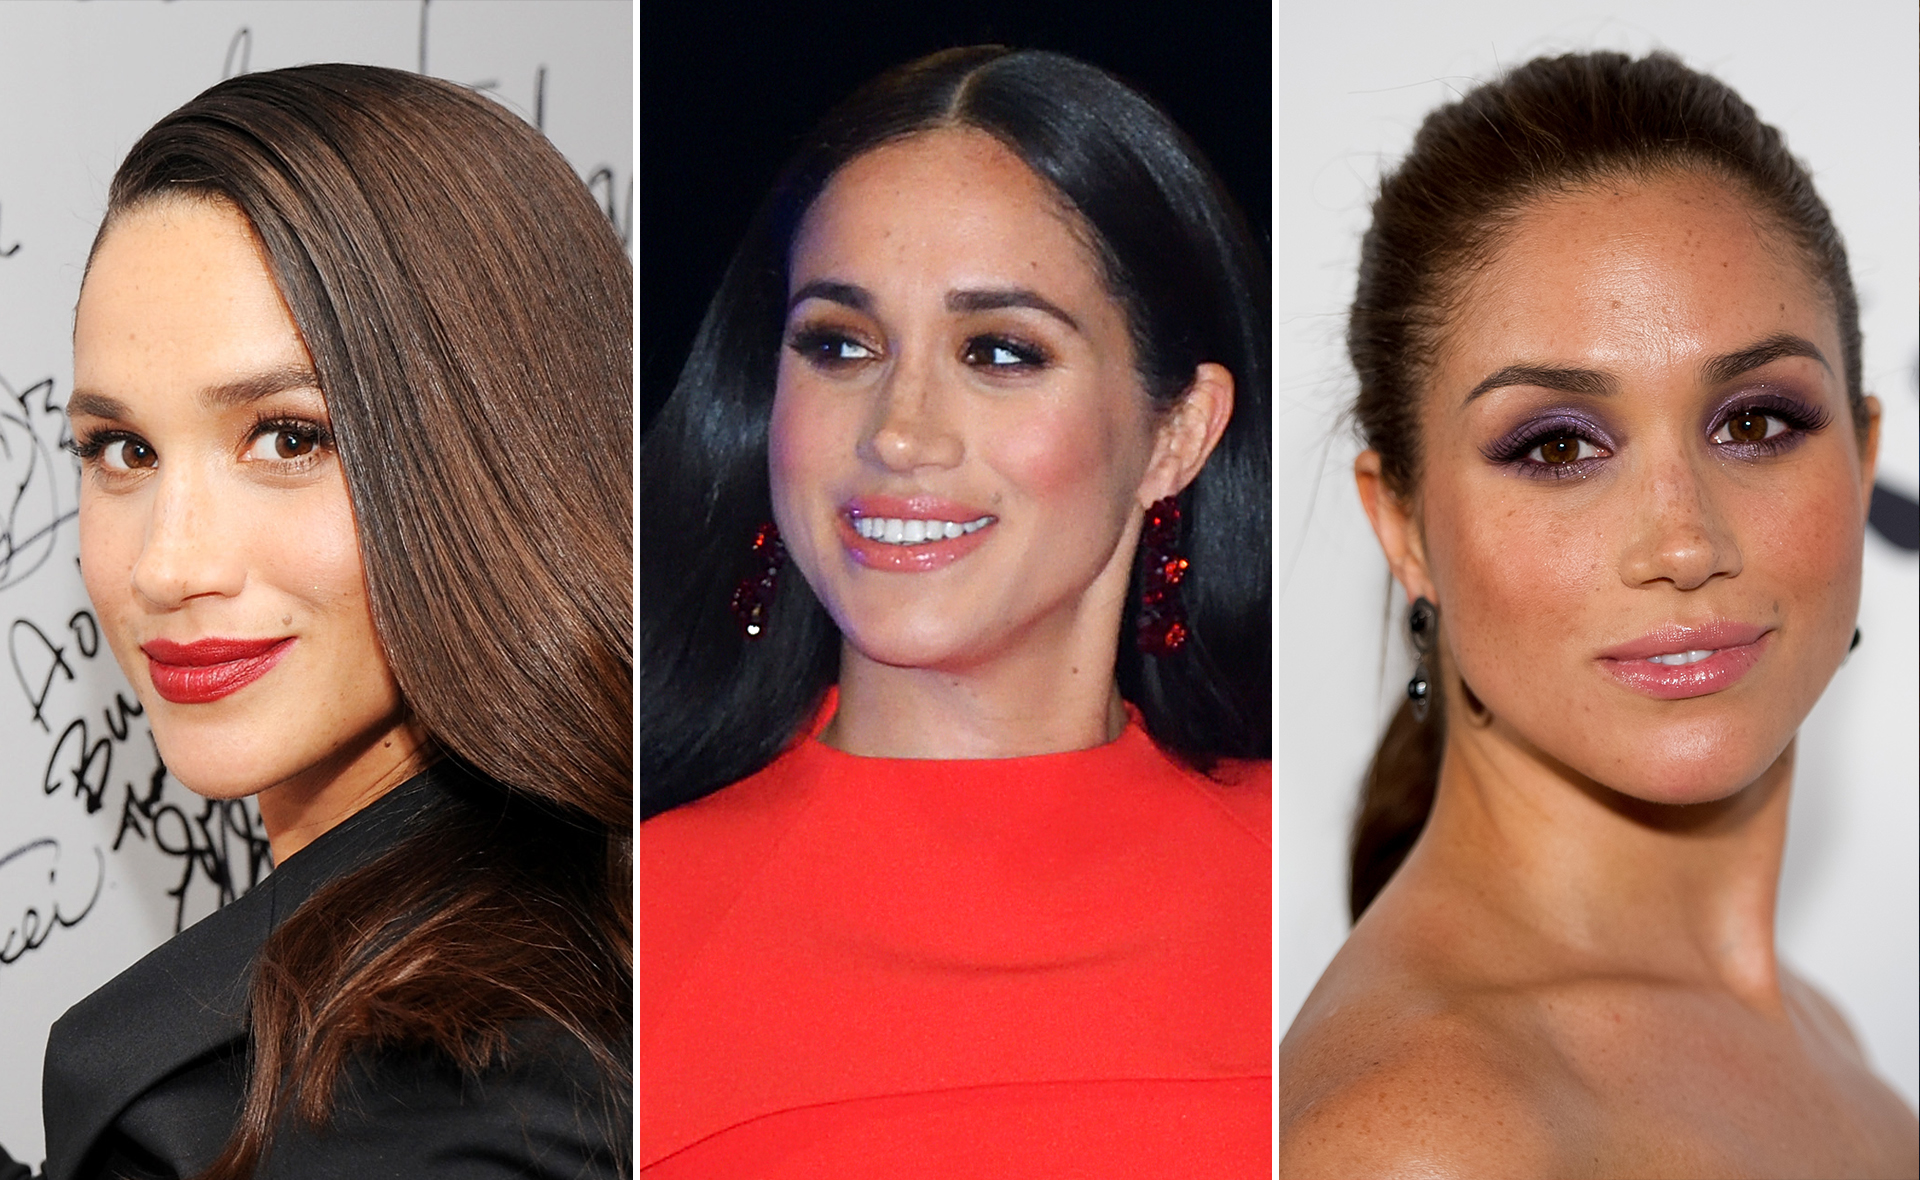 Duchess Meghan’s best makeup looks through the years: From dark liner, to bold lips and her signature glowy skin